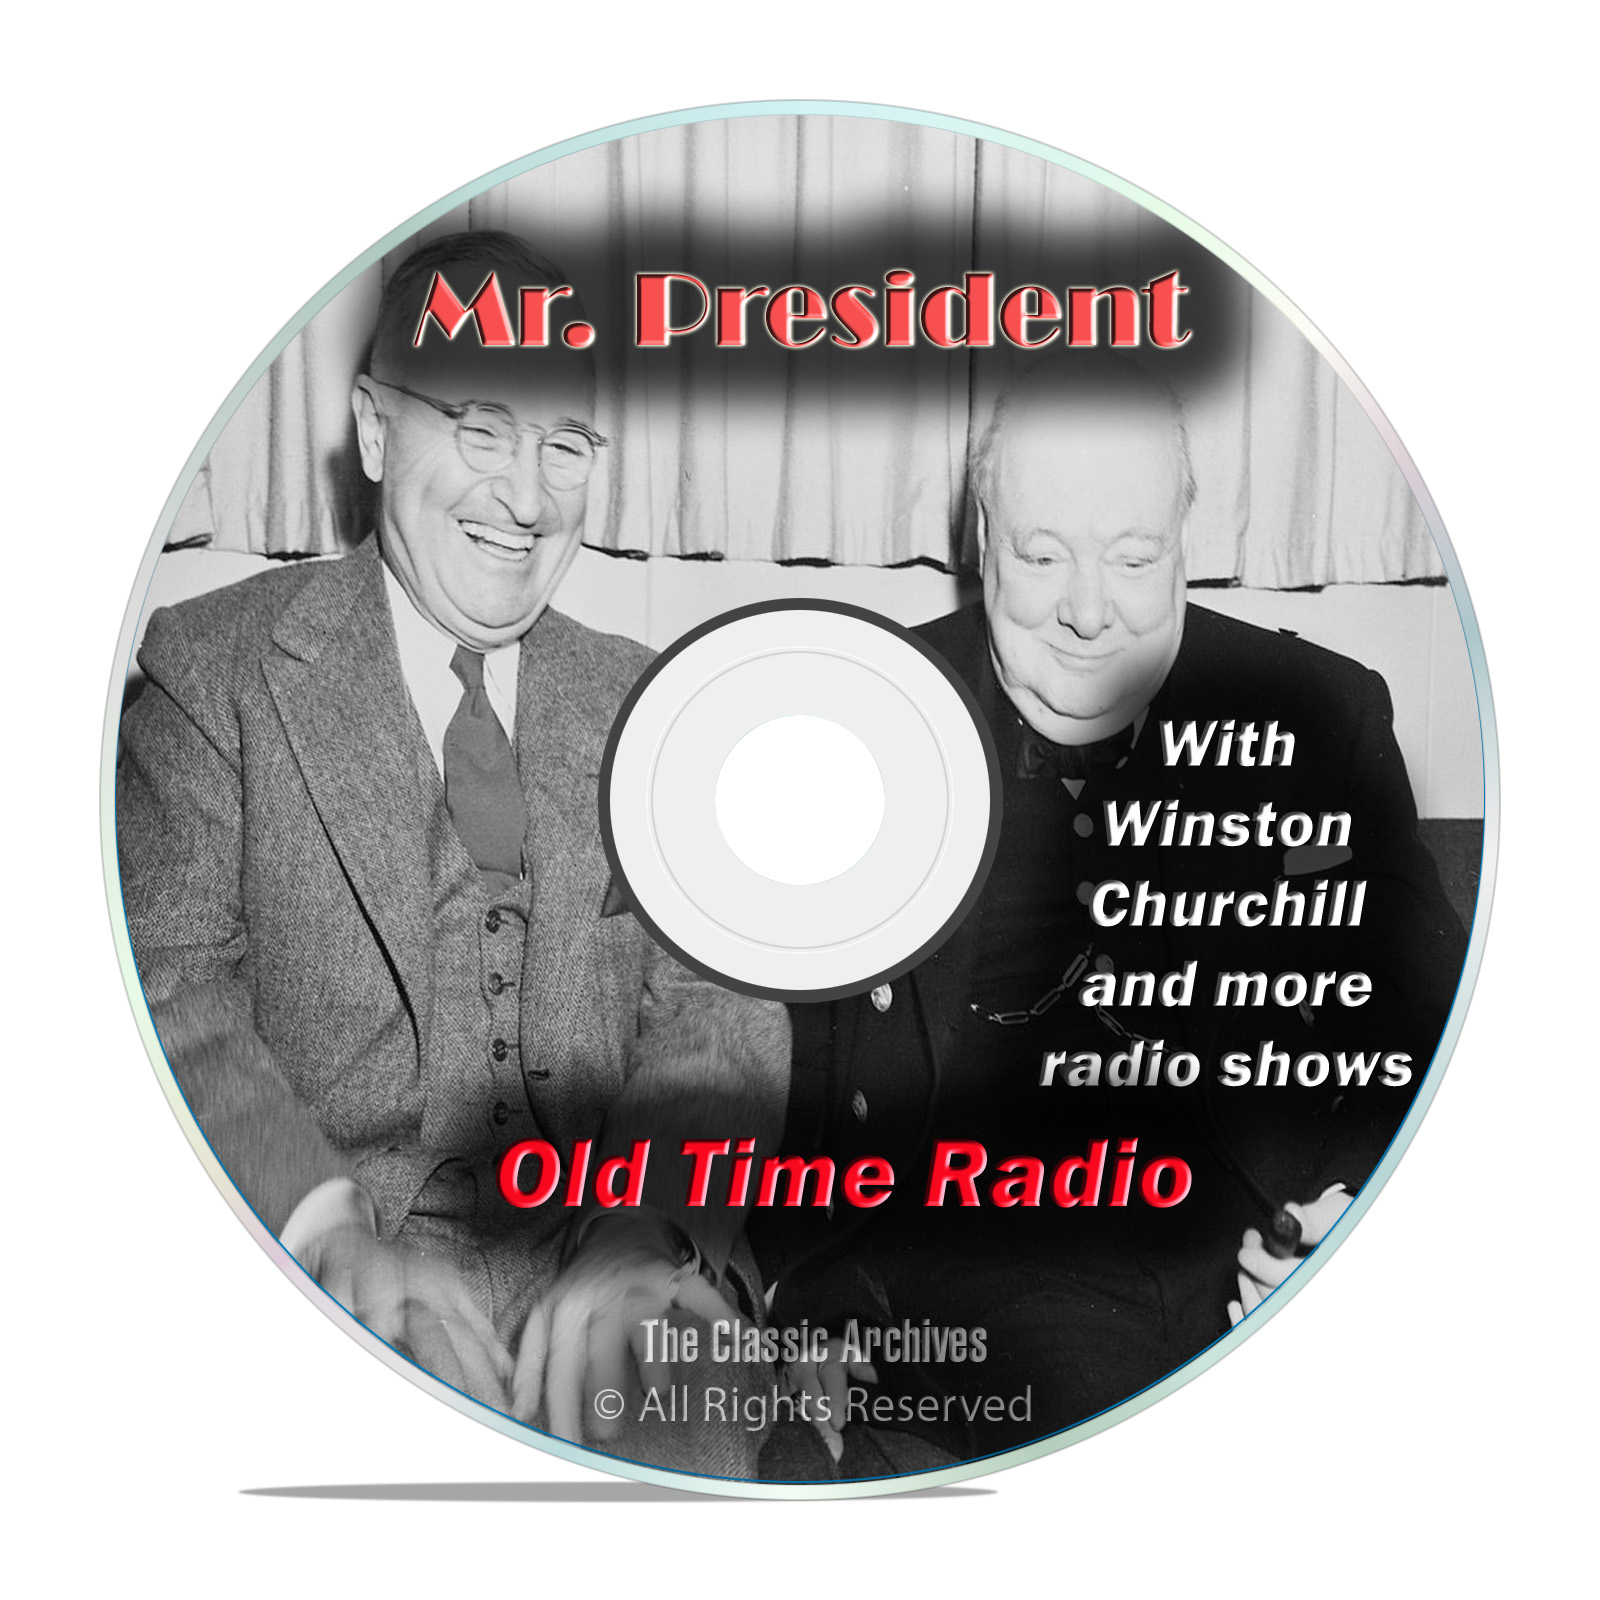 Mr President, 923 Old Time Radio Shows WWII Winston Churchill mp3 DVD